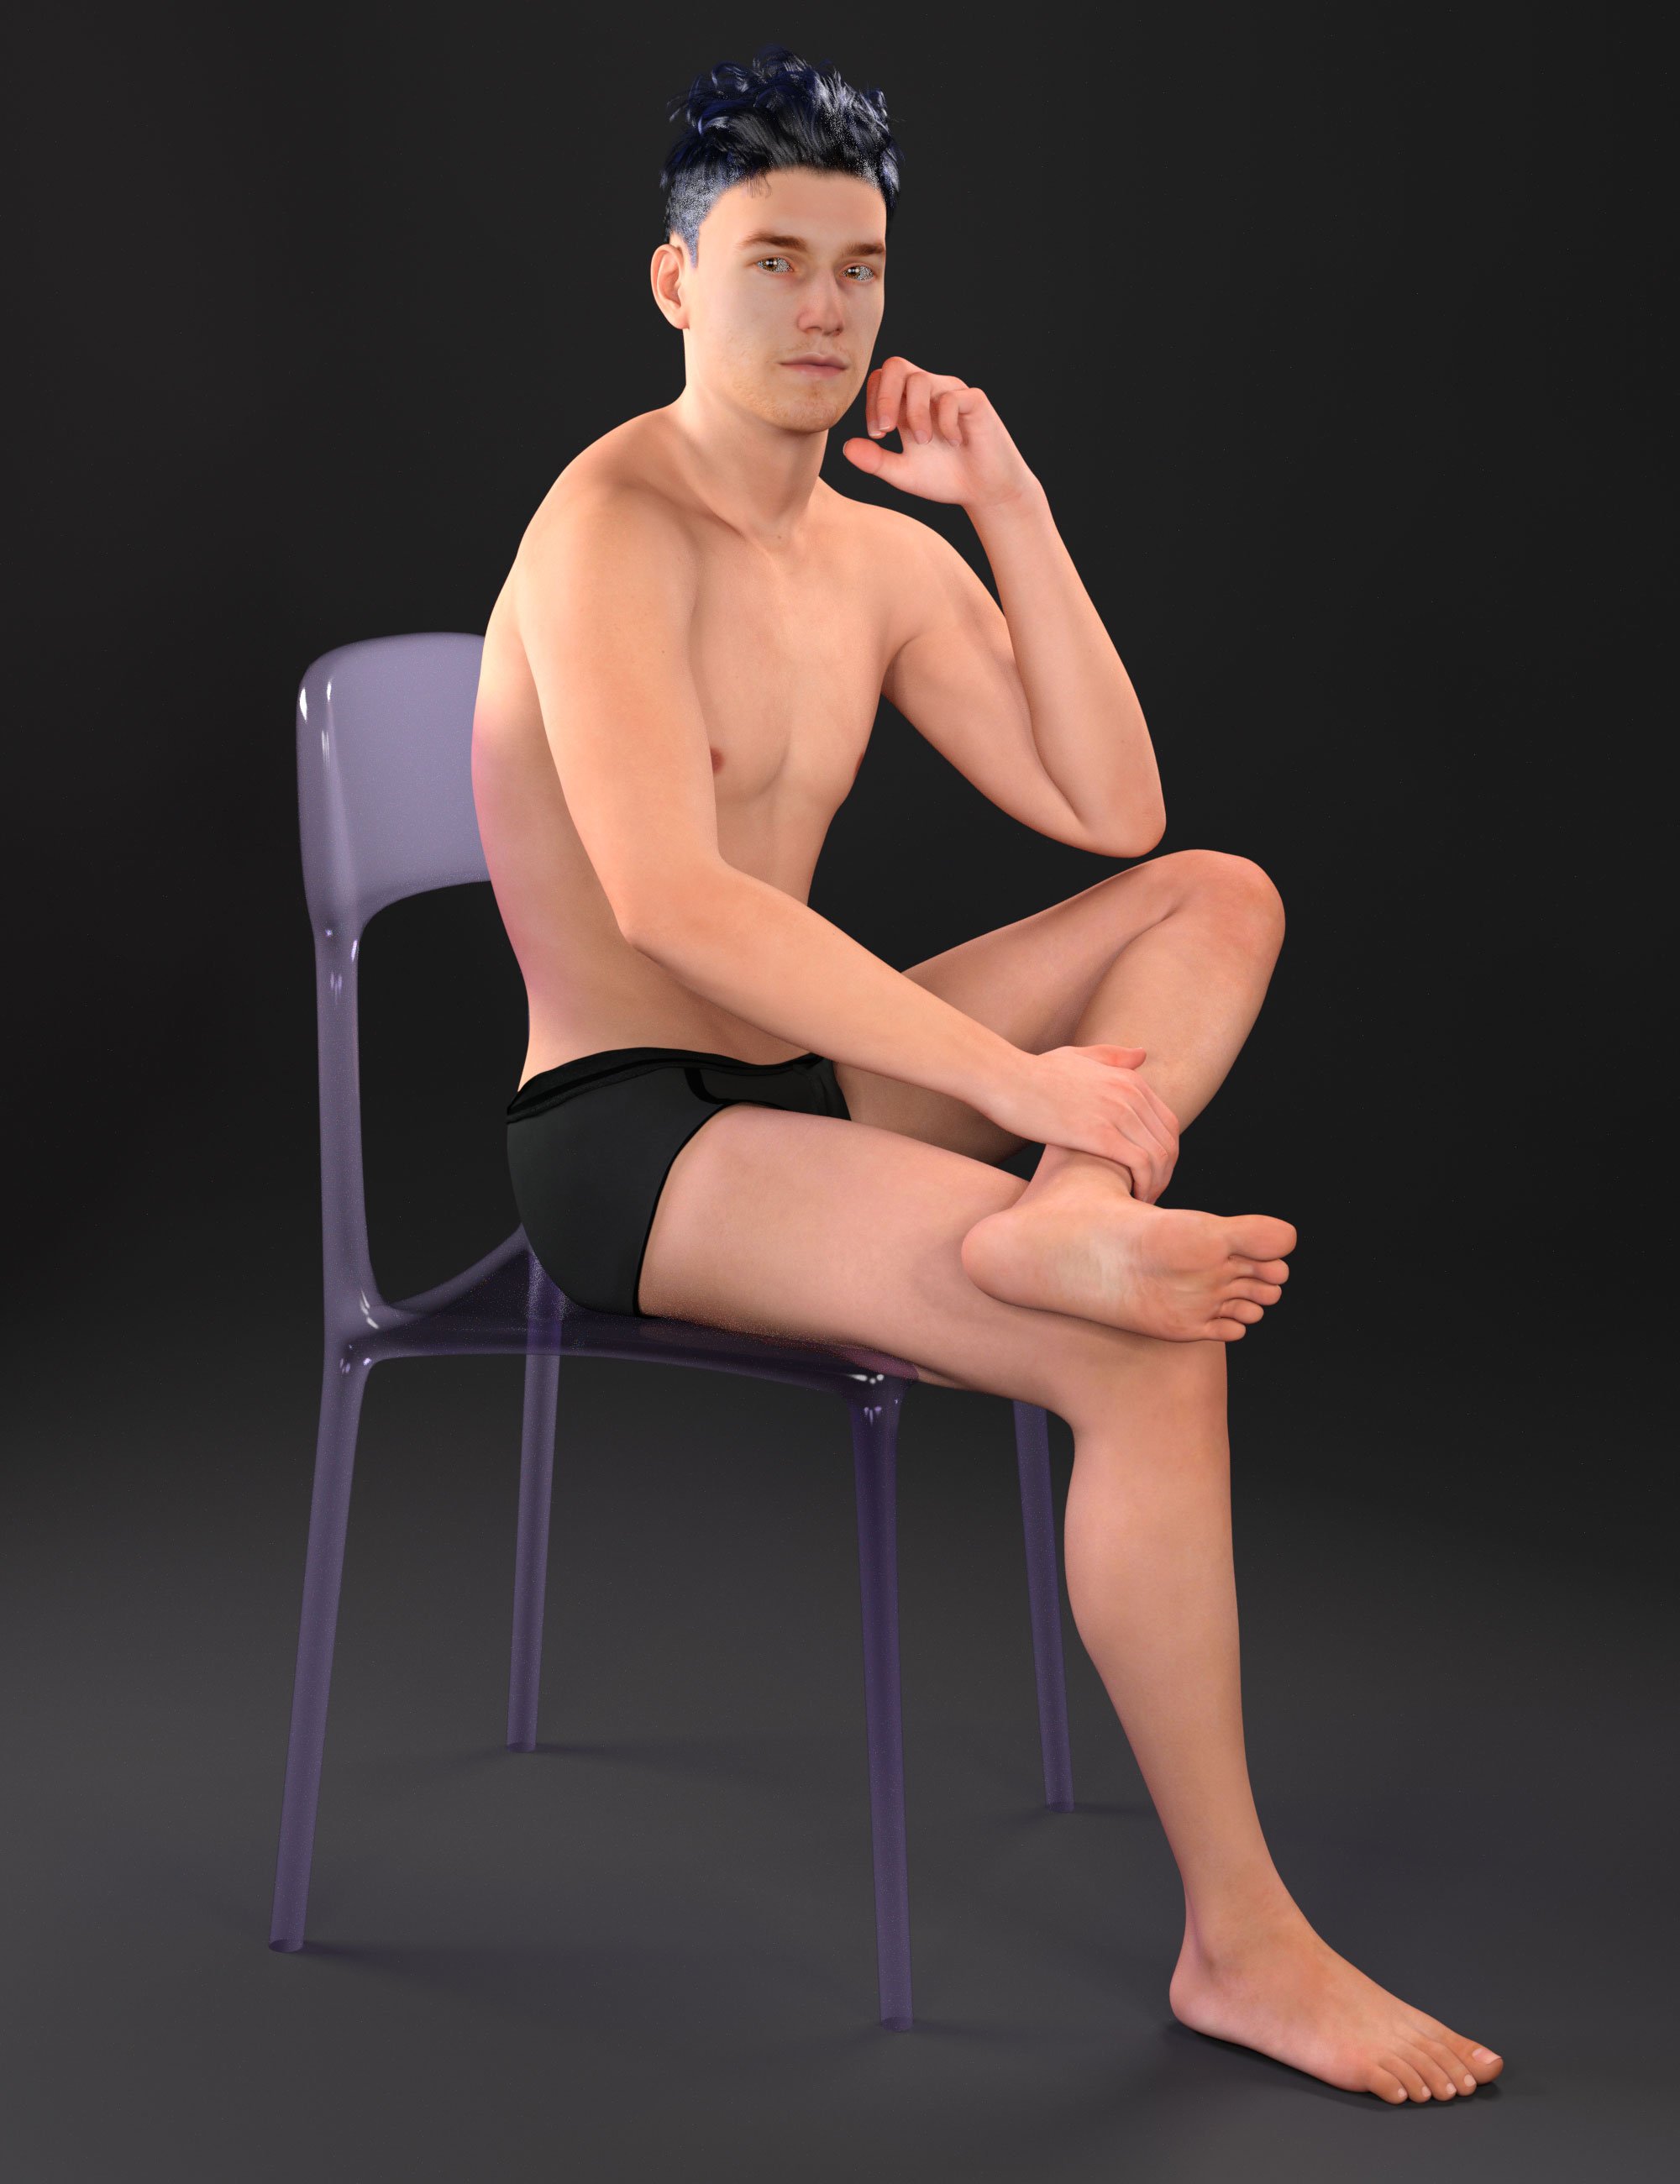 Squishy Human for Genesis 8 and 8.1 Male by: Lyrra MadrilFeralFey, 3D Models by Daz 3D